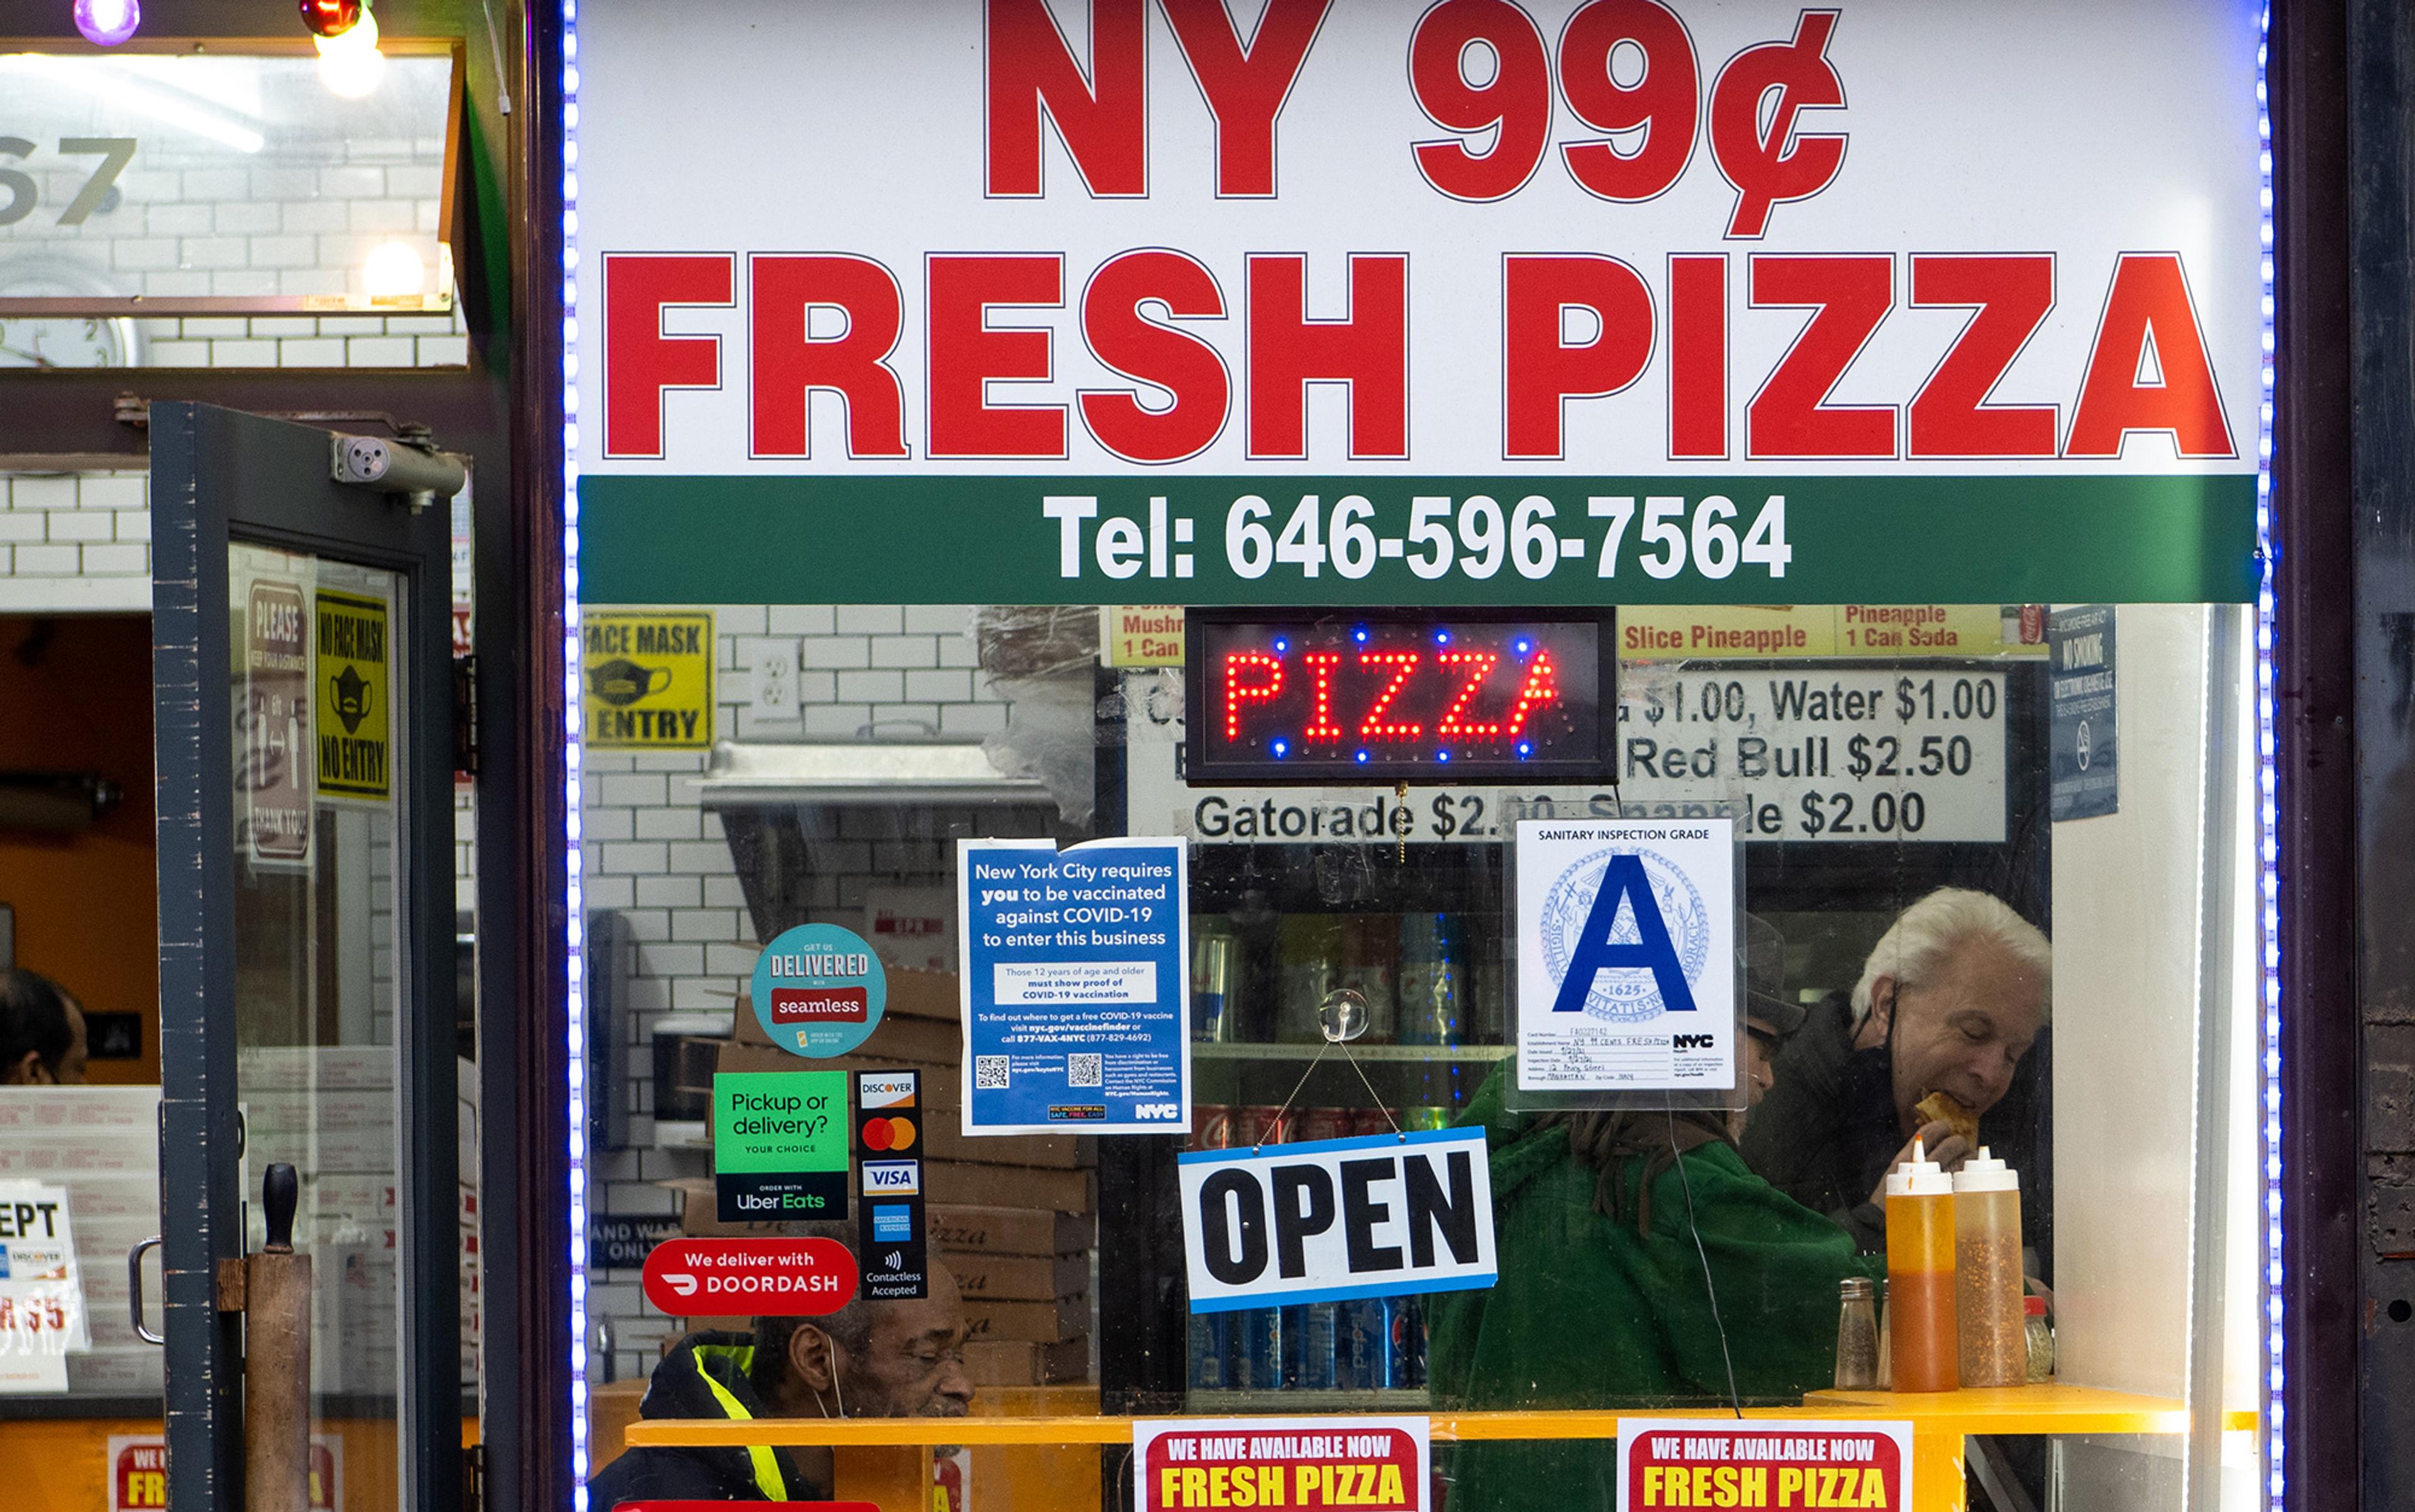 Shopfront of NY 99 Cent Fresh Pizza restaurant with an open sign, vaccine notice, and menu visible through the window.